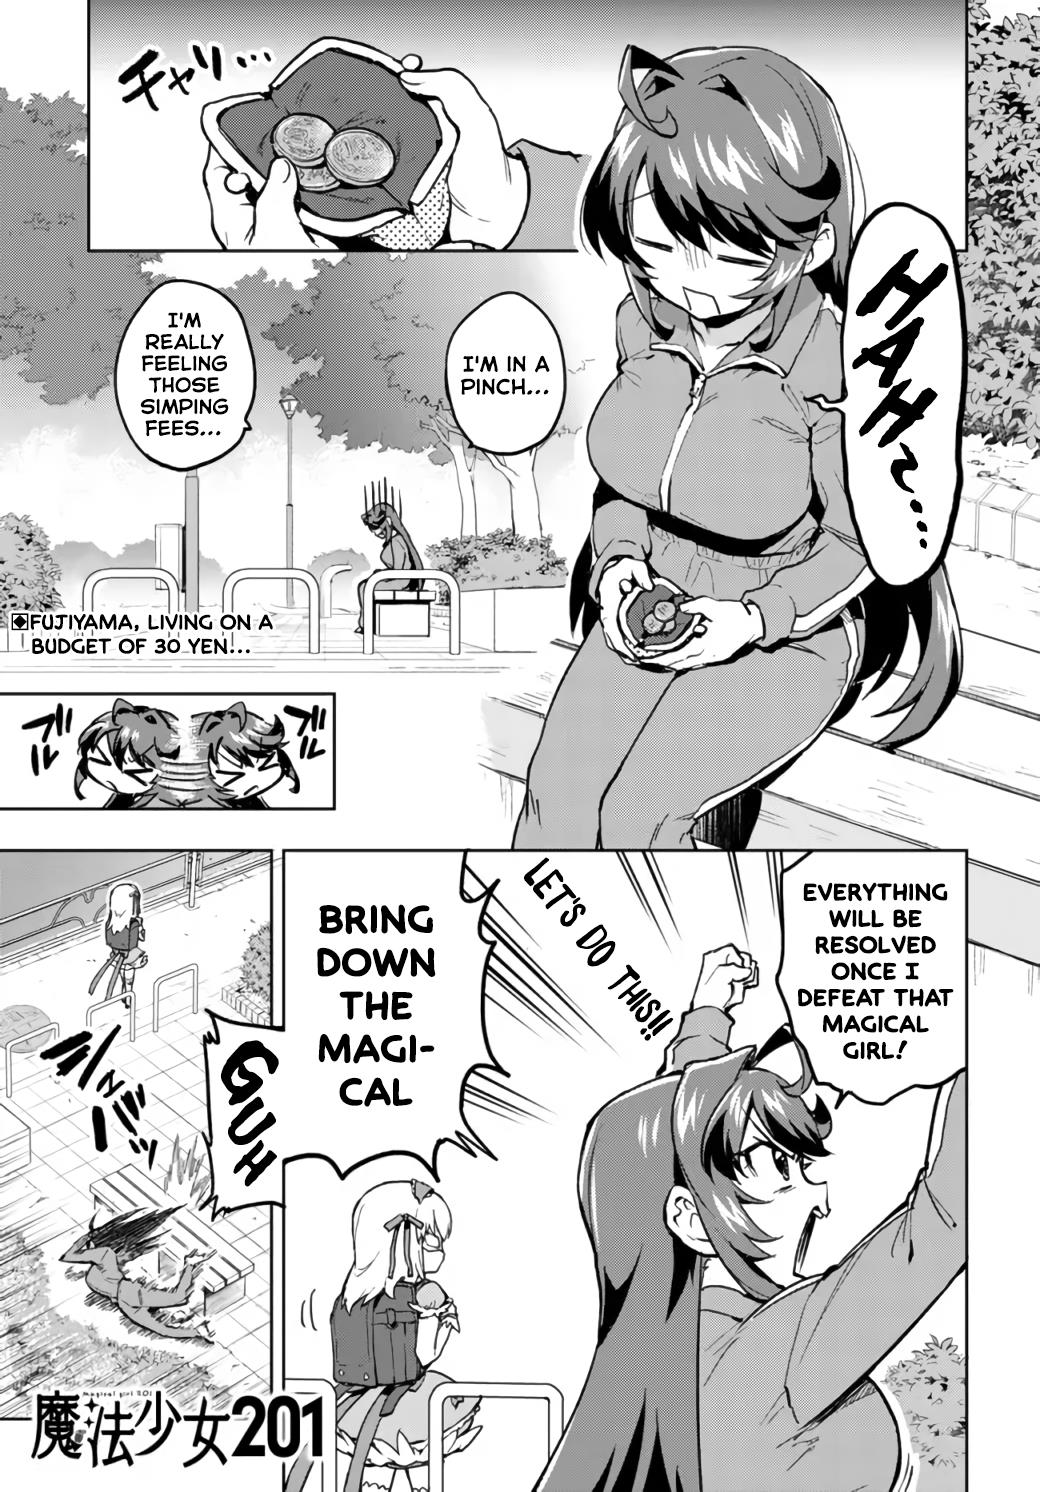 Magical Girl 201 - Page 1